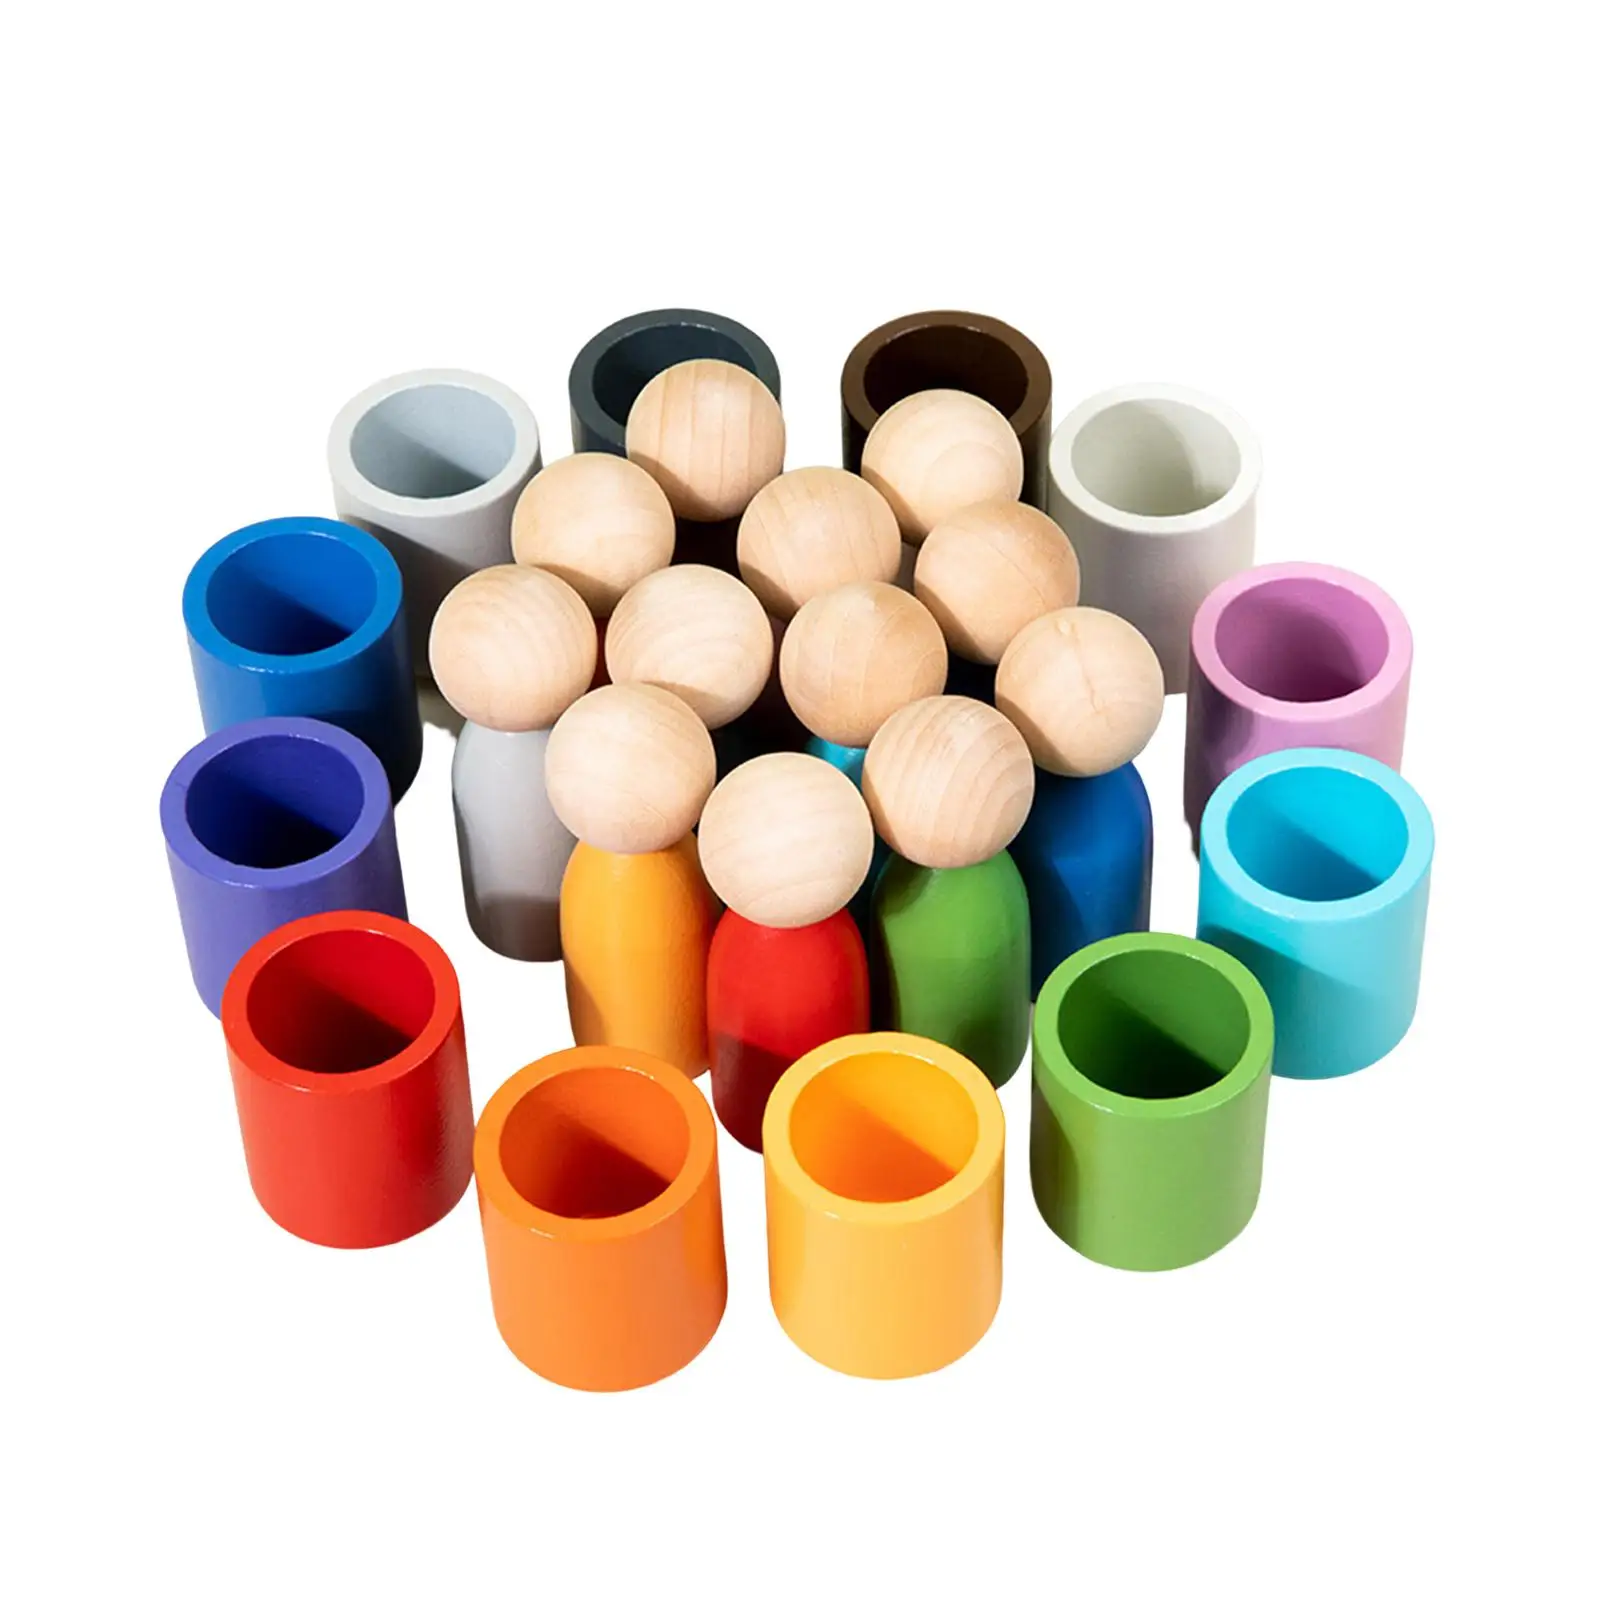 Balls in Cups Montessori Color Classification Educational Toys Wooden Sorter Game for Kids Toddlers Girls Birthday Gifts